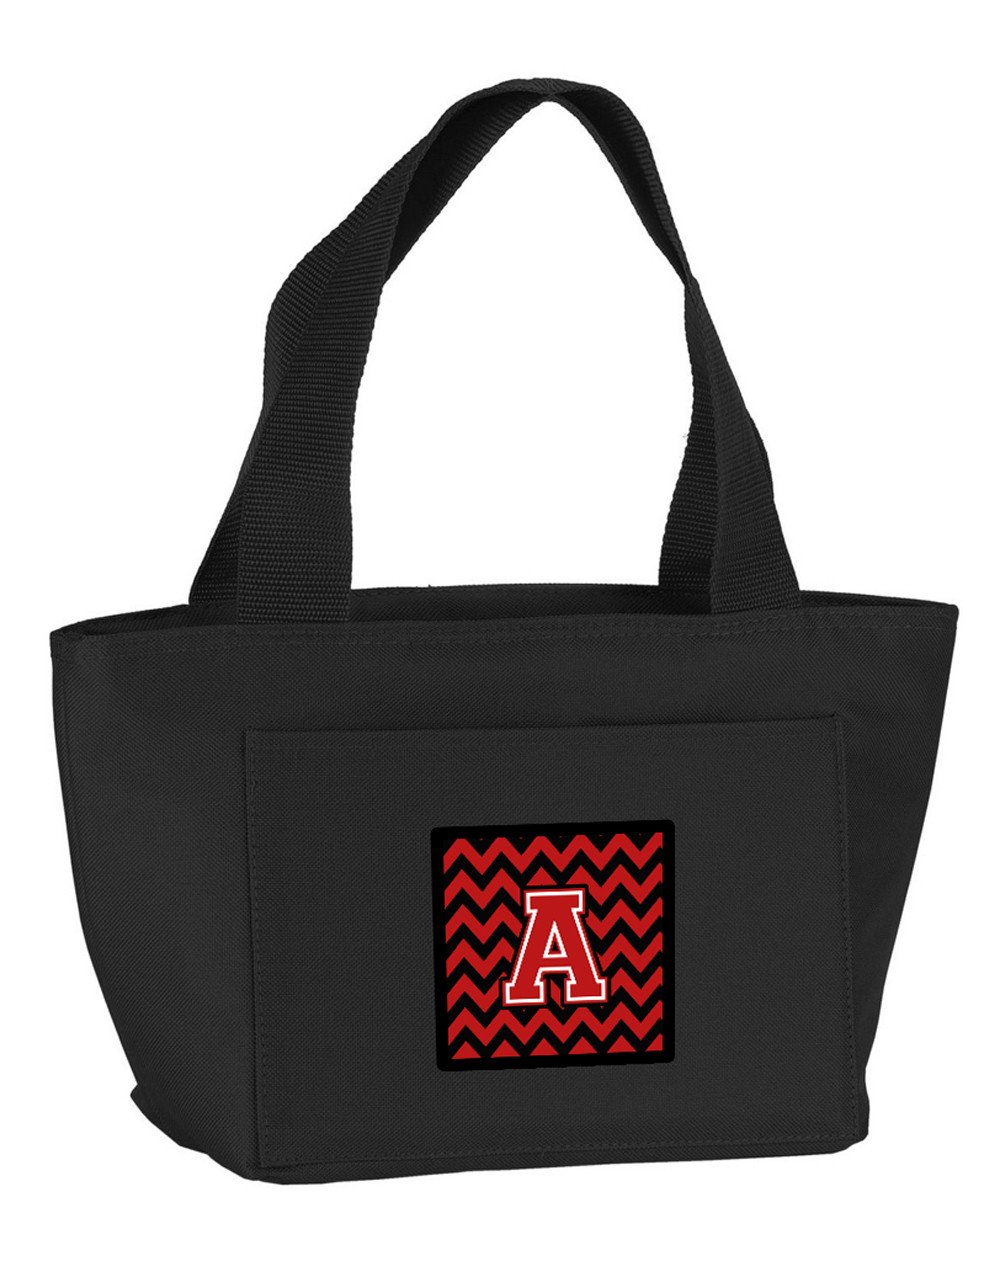 Letter A Chevron Black and Red   Lunch Bag CJ1047-ABK-8808 by Caroline's Treasures